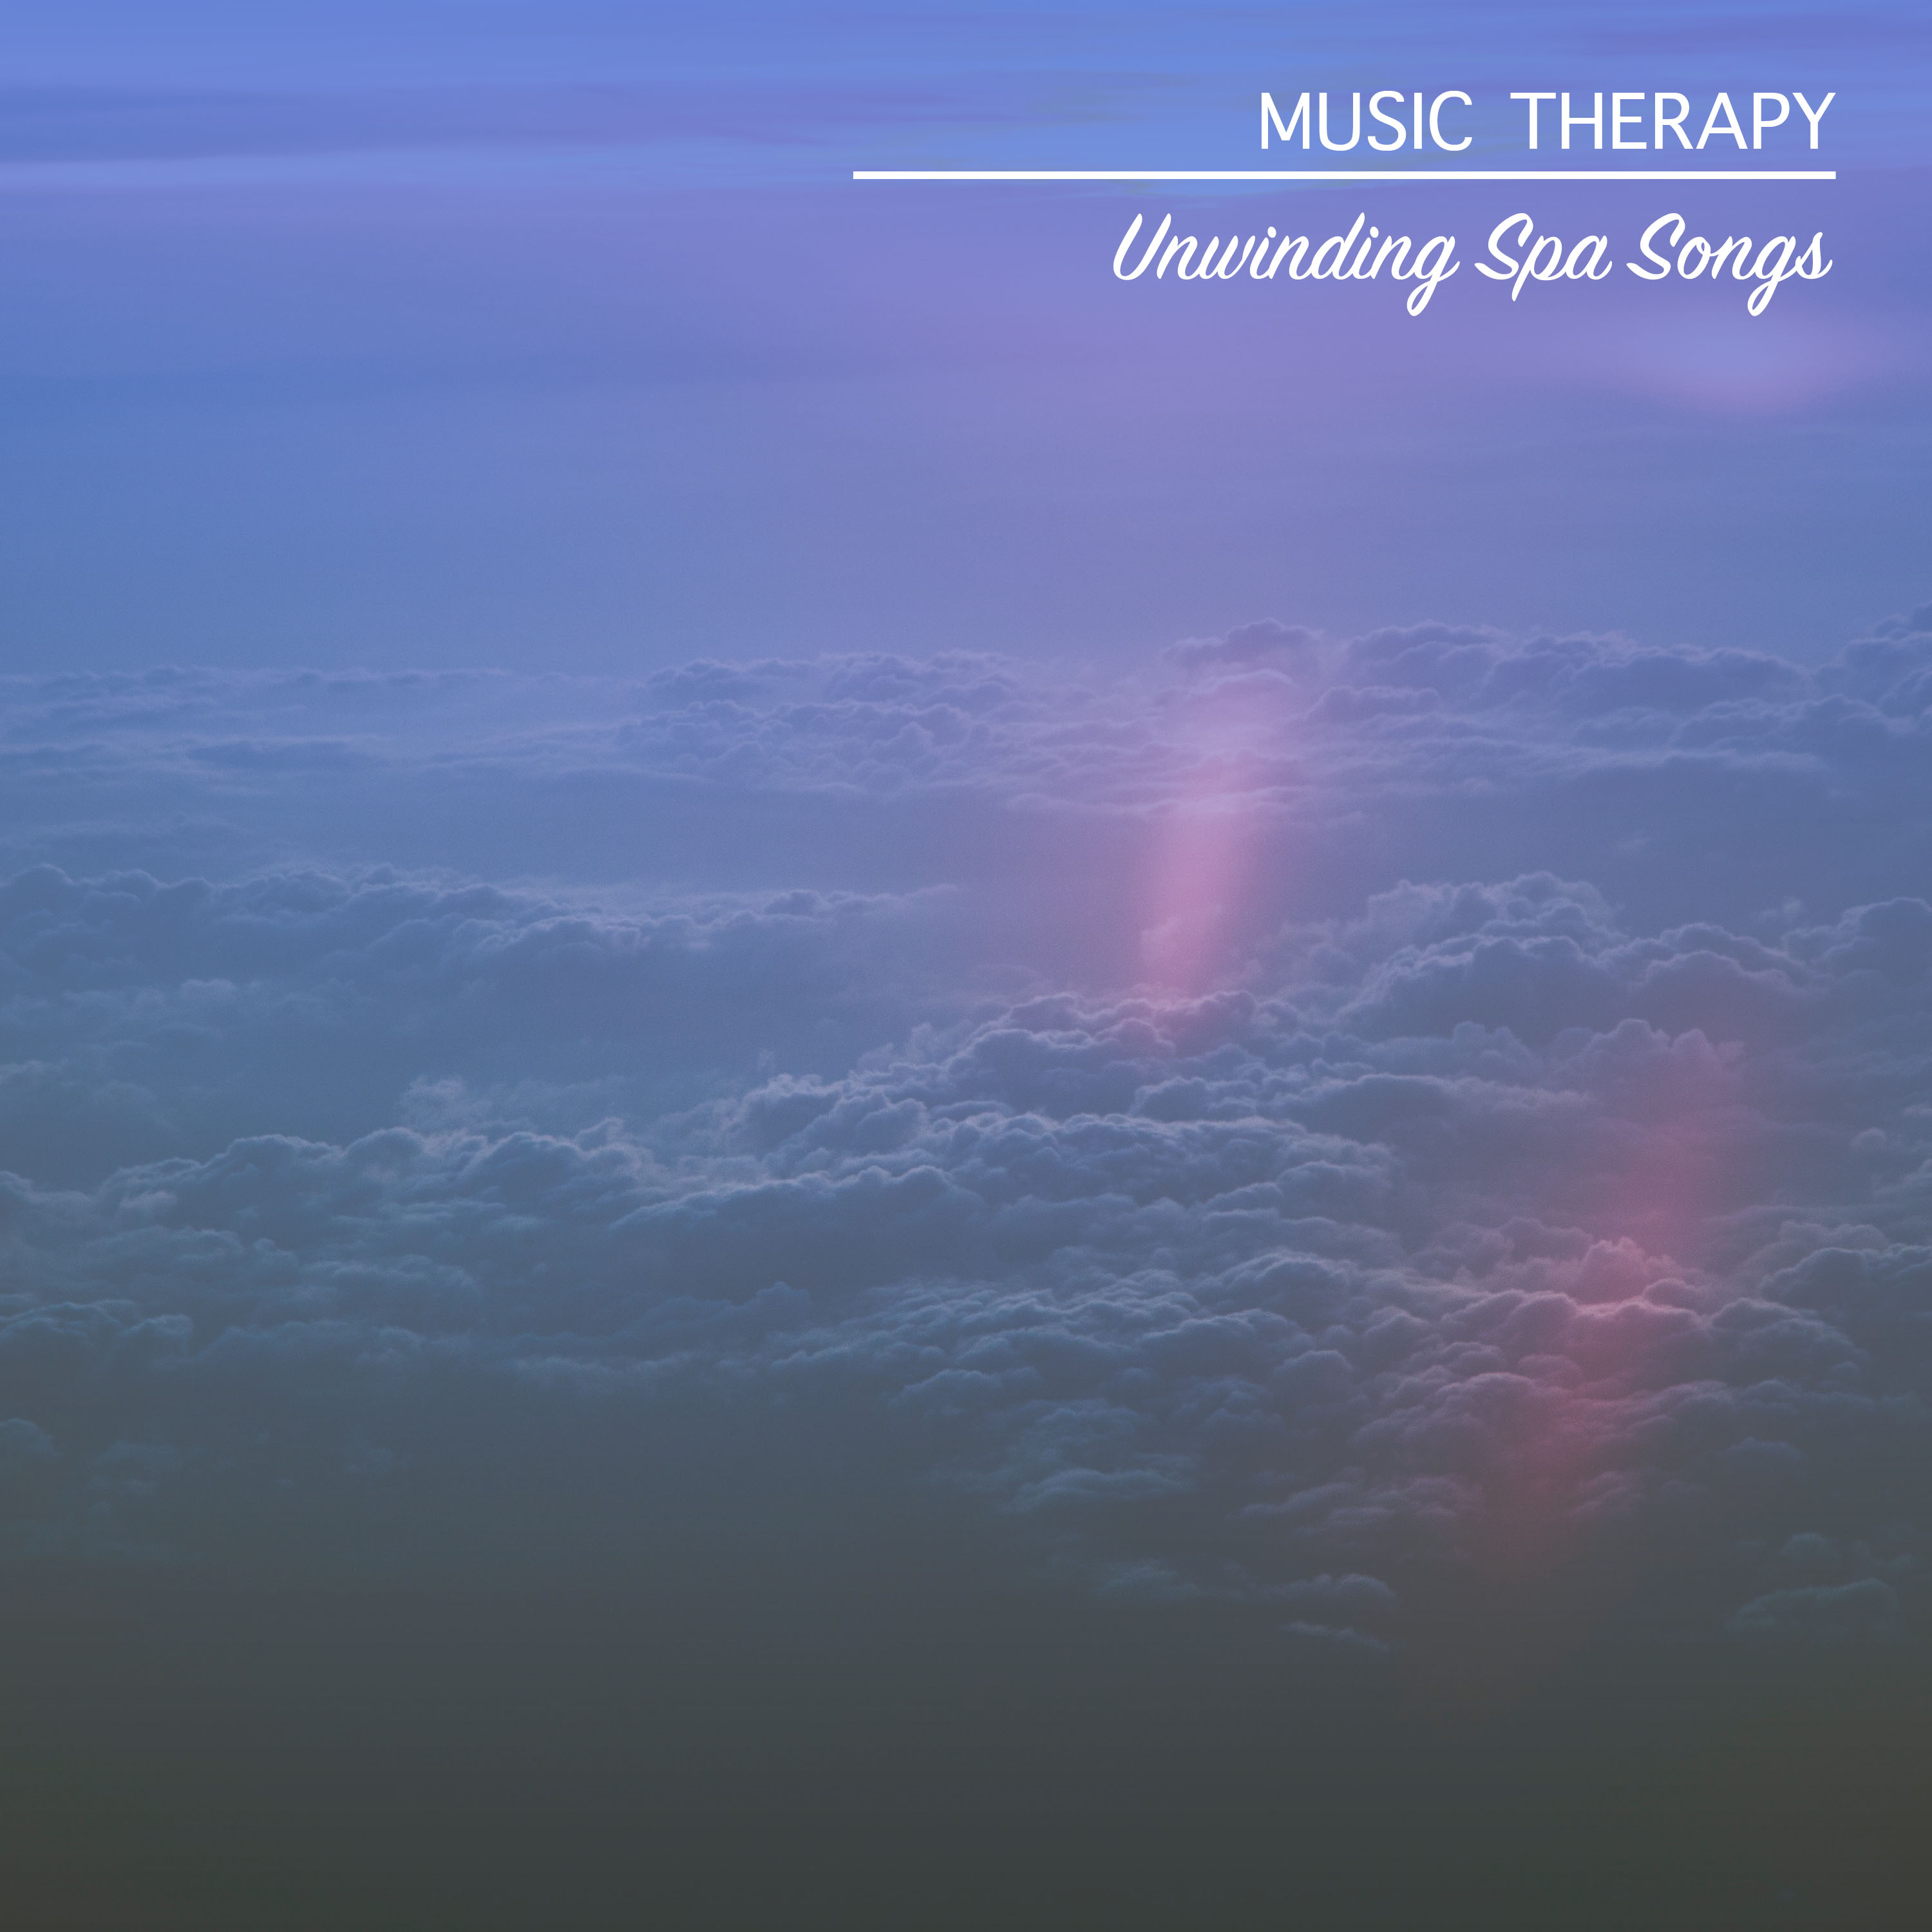 14 Unwinding Spa Songs: Music Therapy